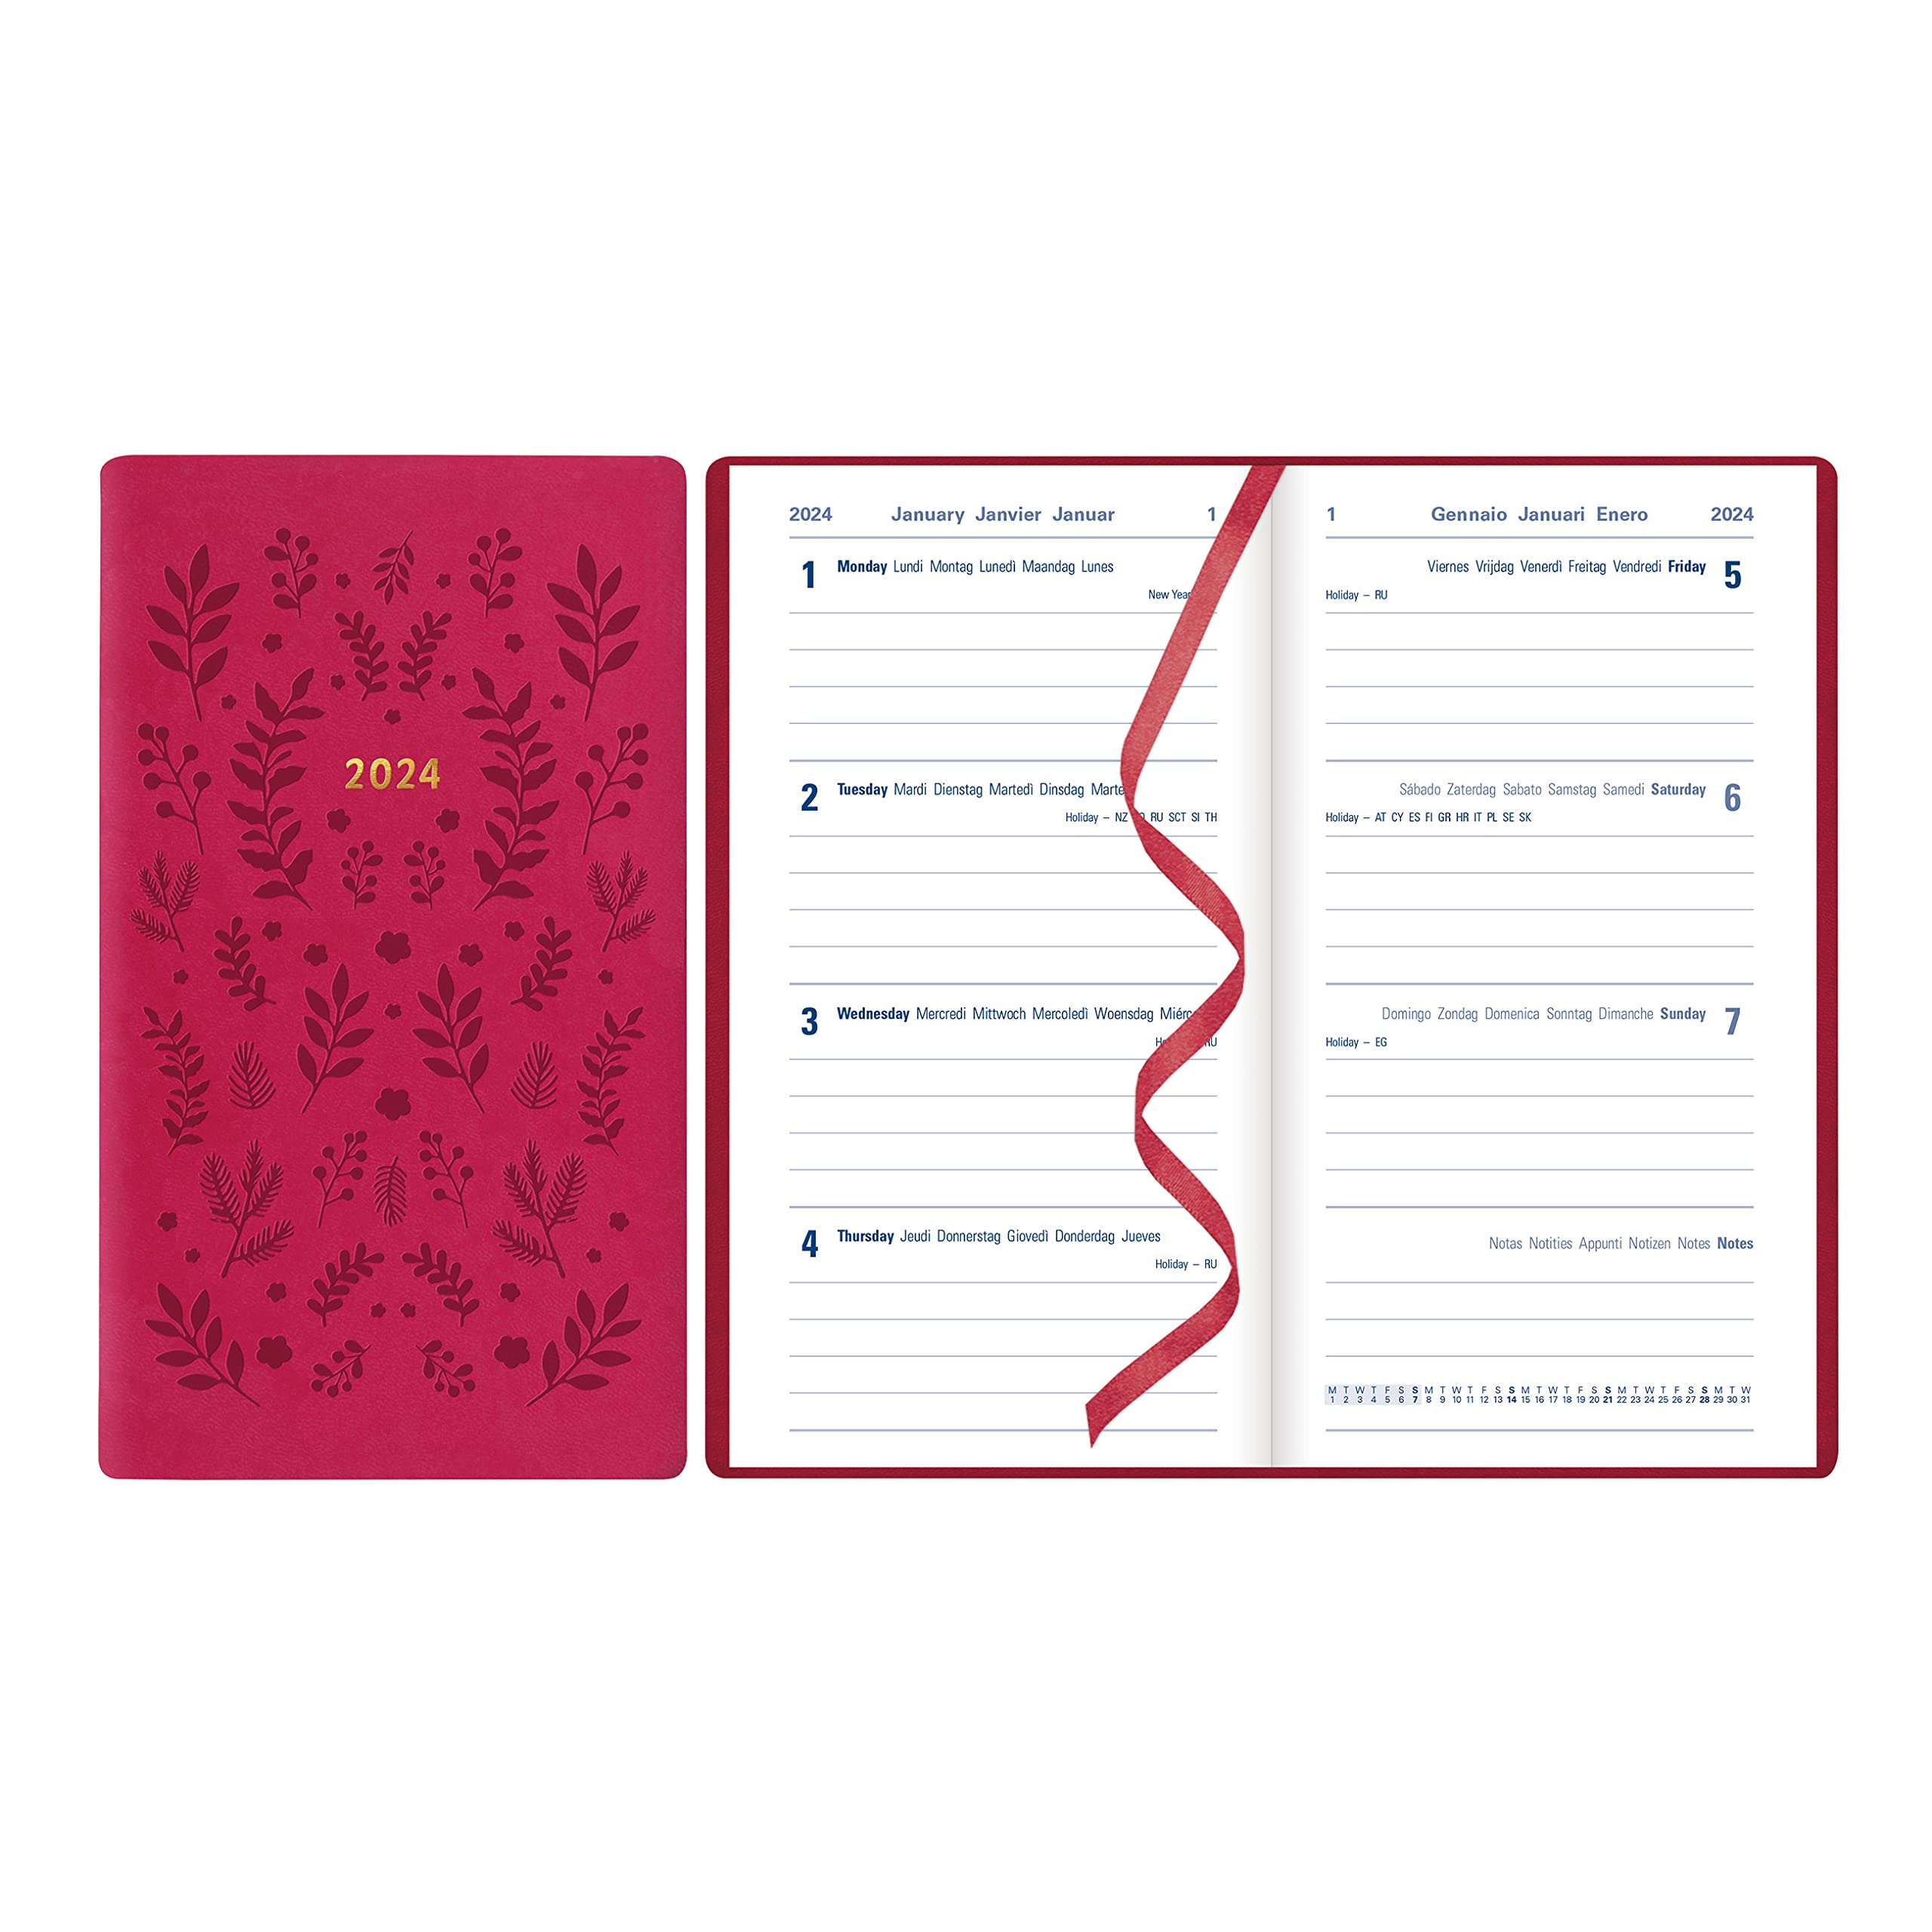 Letts of London Woodland Weekly Planner, 12 Months, January to December, 2024, Pocket Size, 5.875" x 3.125", Multilingual, Pink (C082174-24)